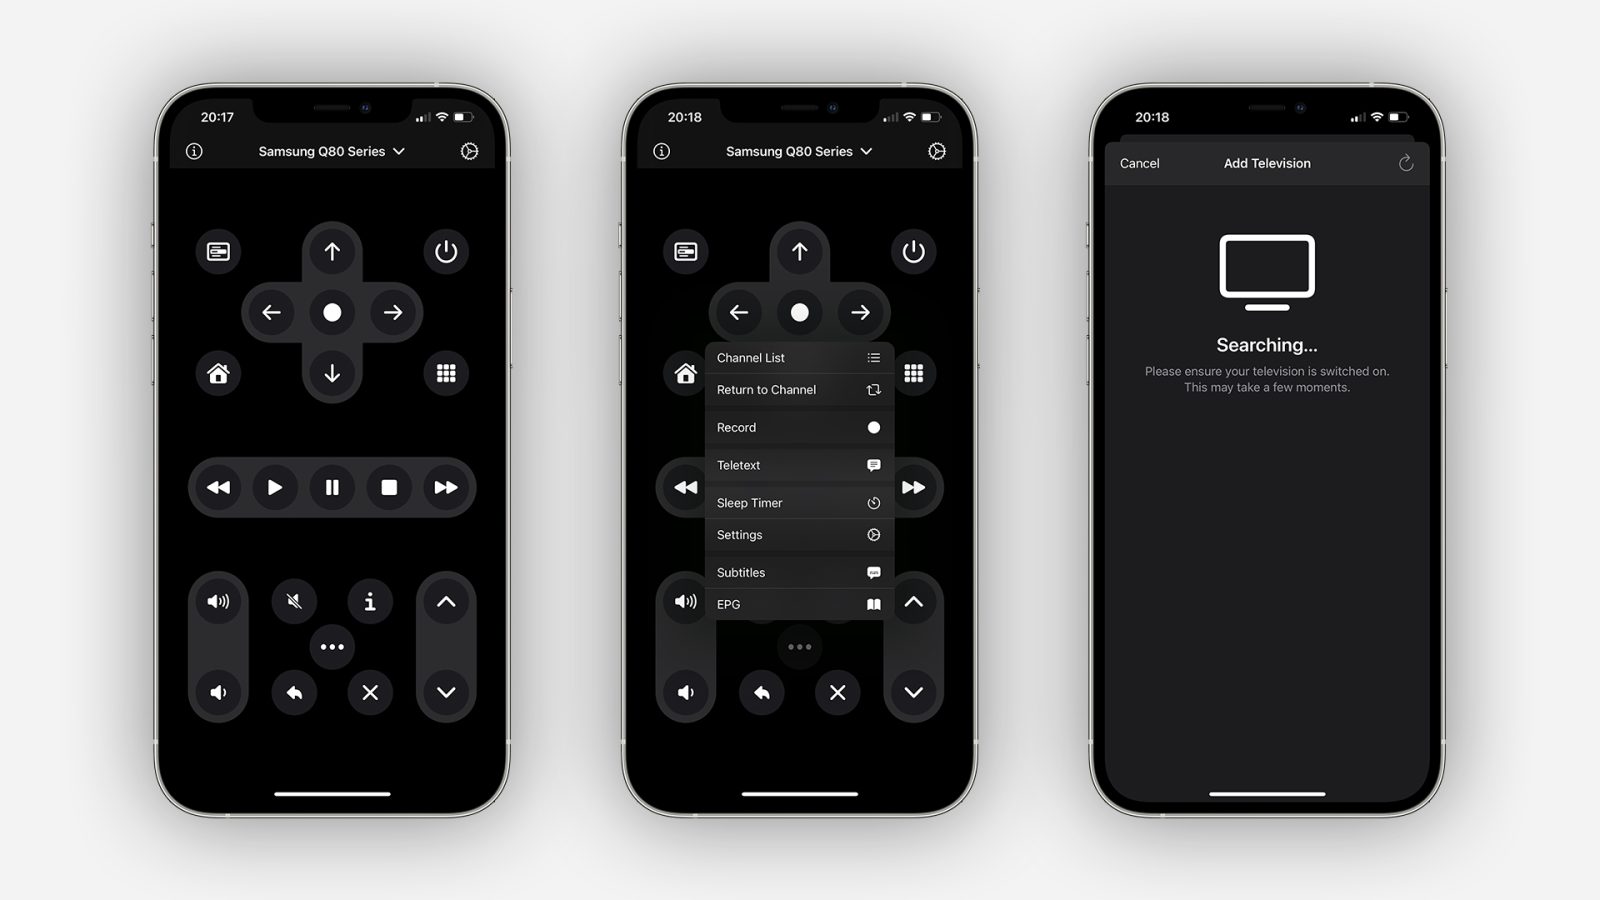 Tv Remote' Turns Your Iphone Into A Universal Control For Tvs - 9To5Mac